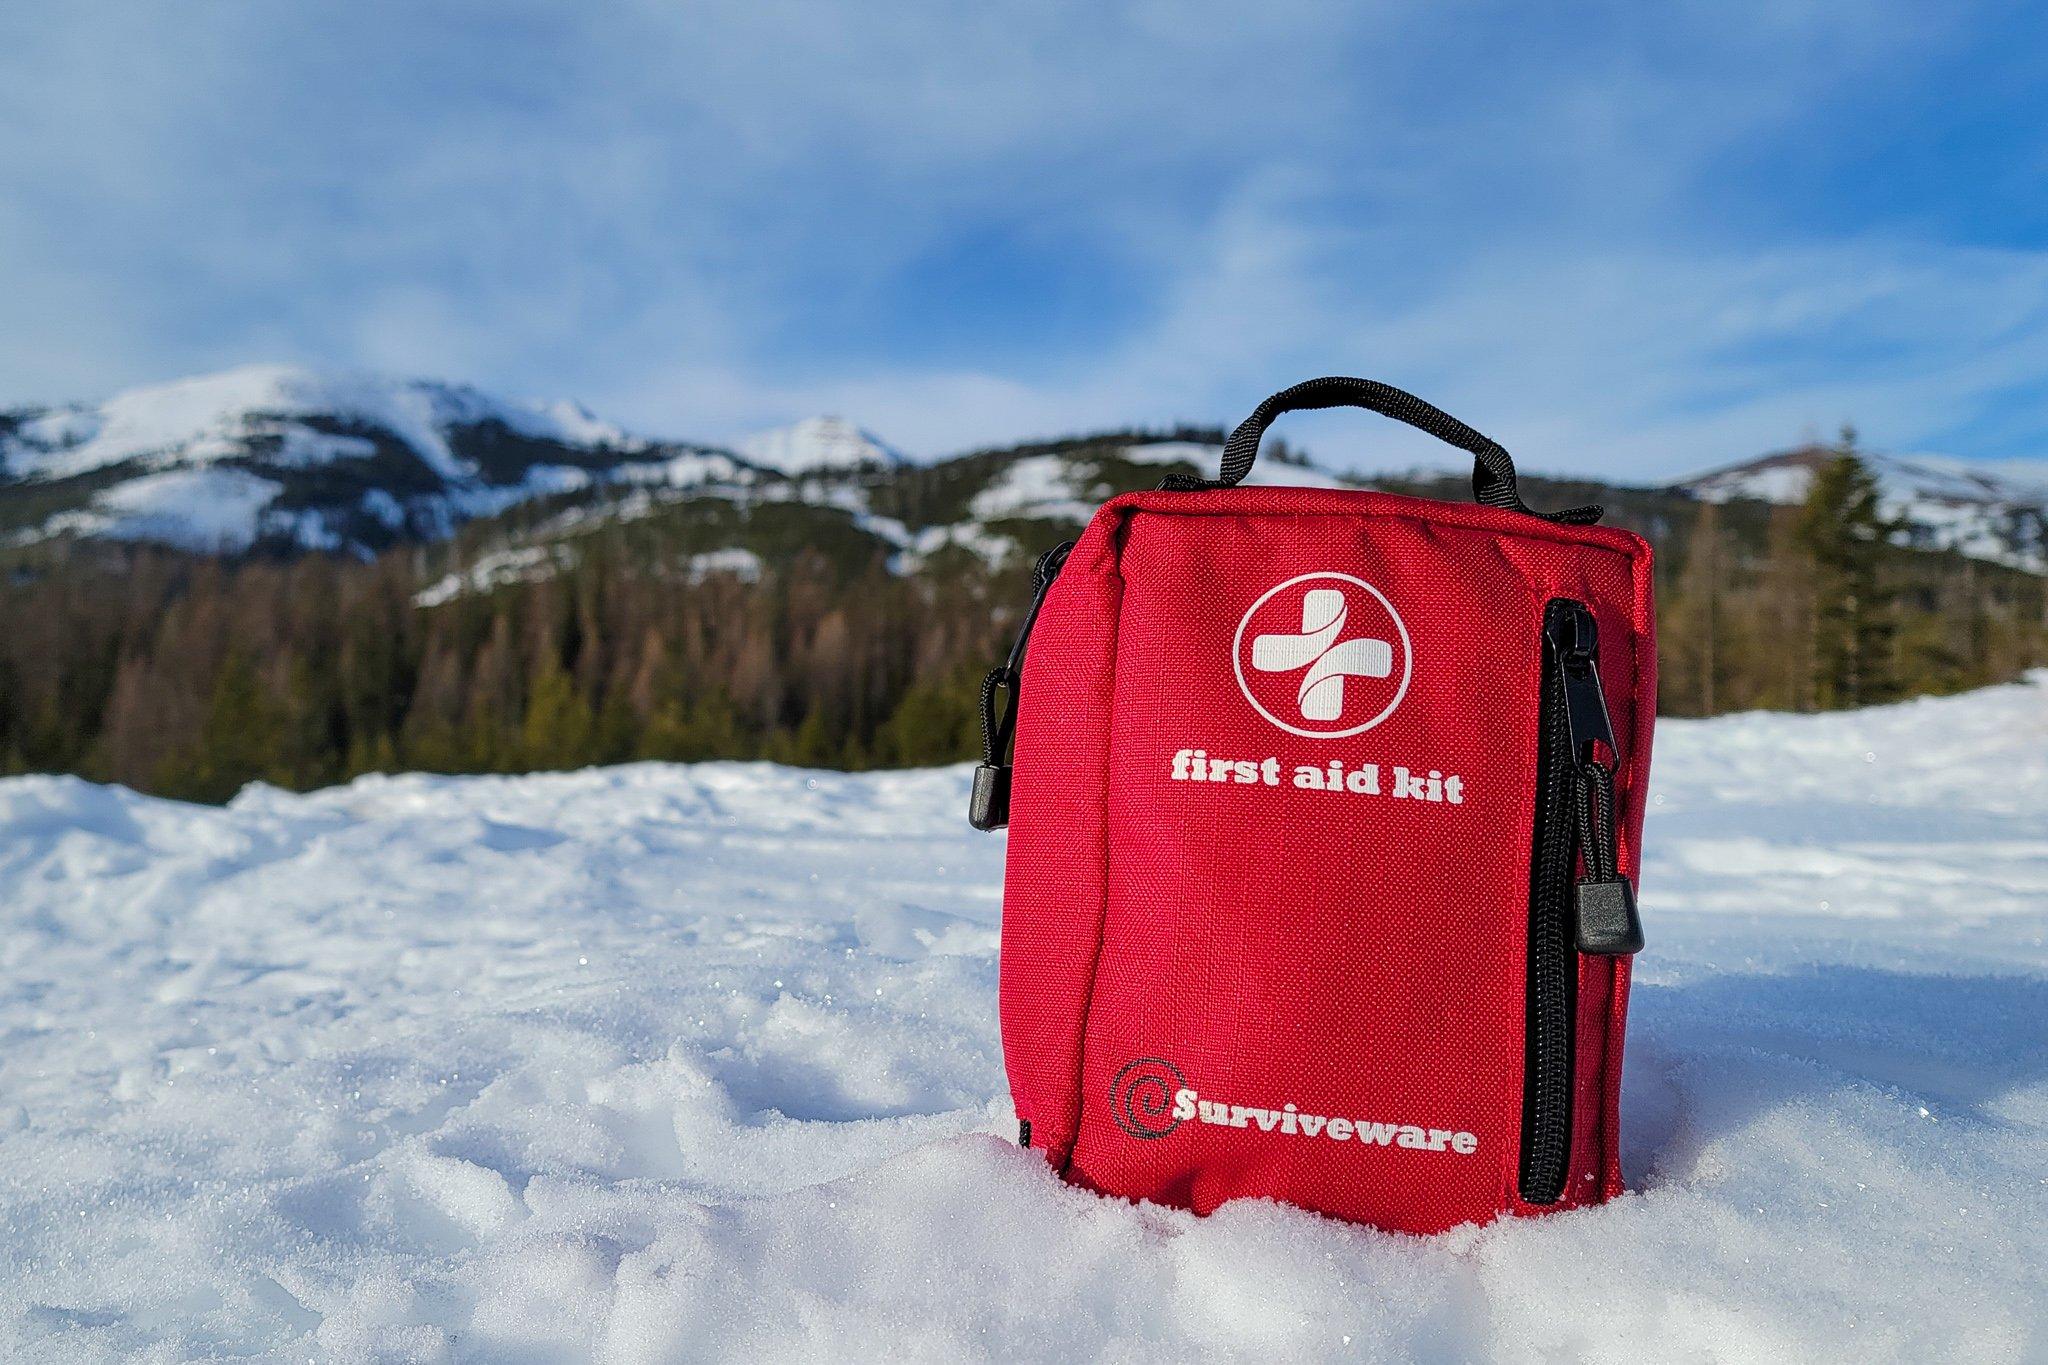 Outdoor First Aid Kit - High Peak First Aid